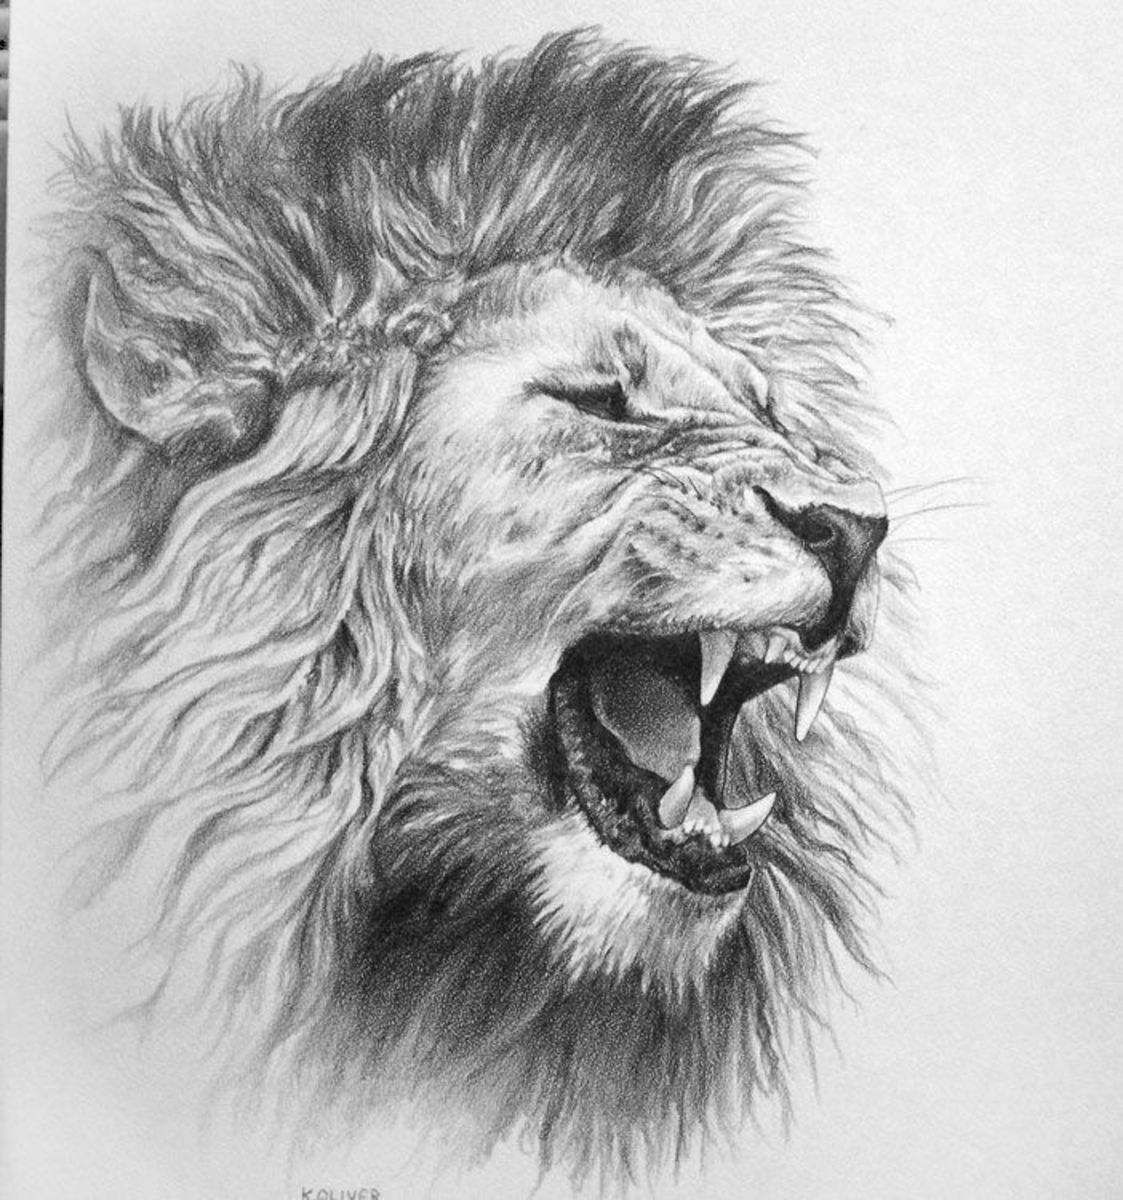 Lion Hearted